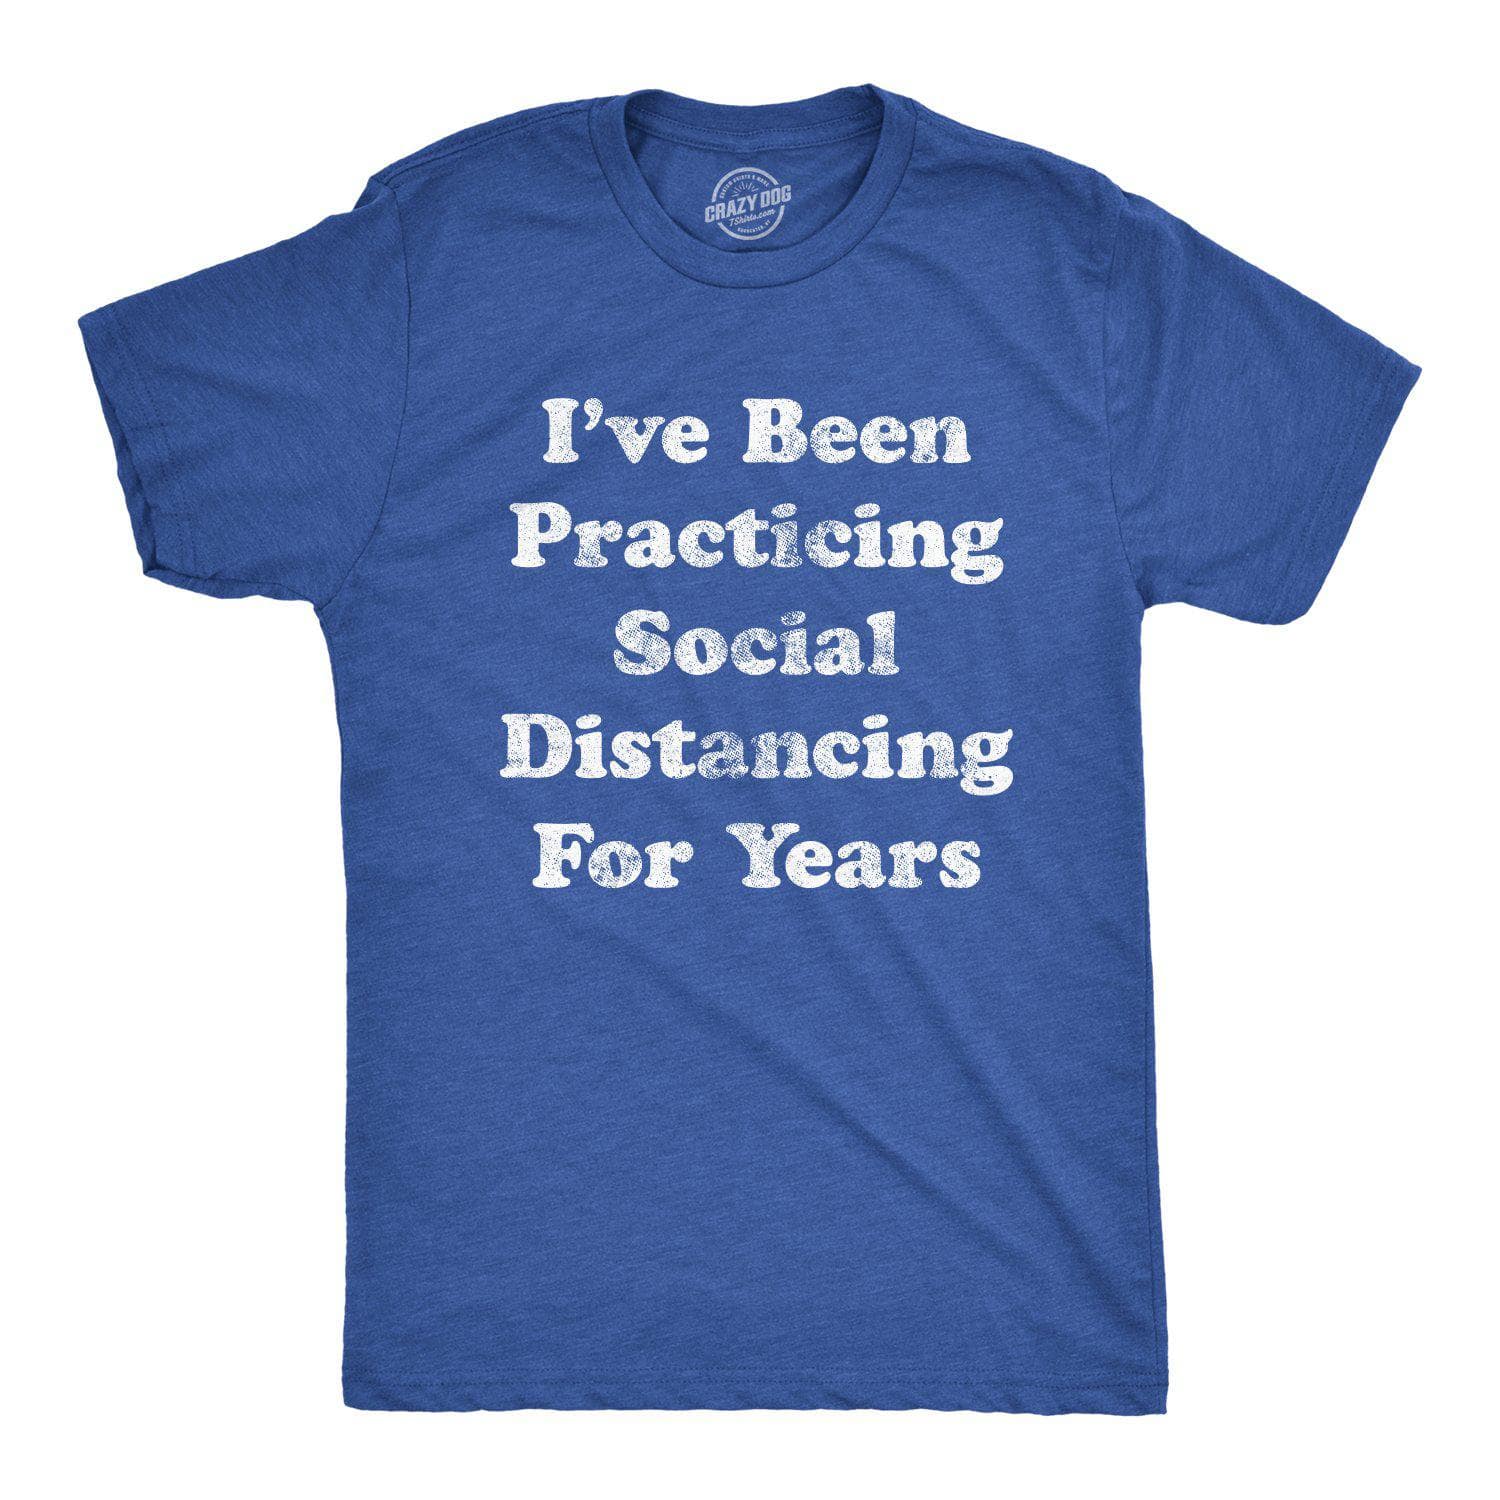 I've Been Social Distancing For Years Men's Tshirt  -  Crazy Dog T-Shirts